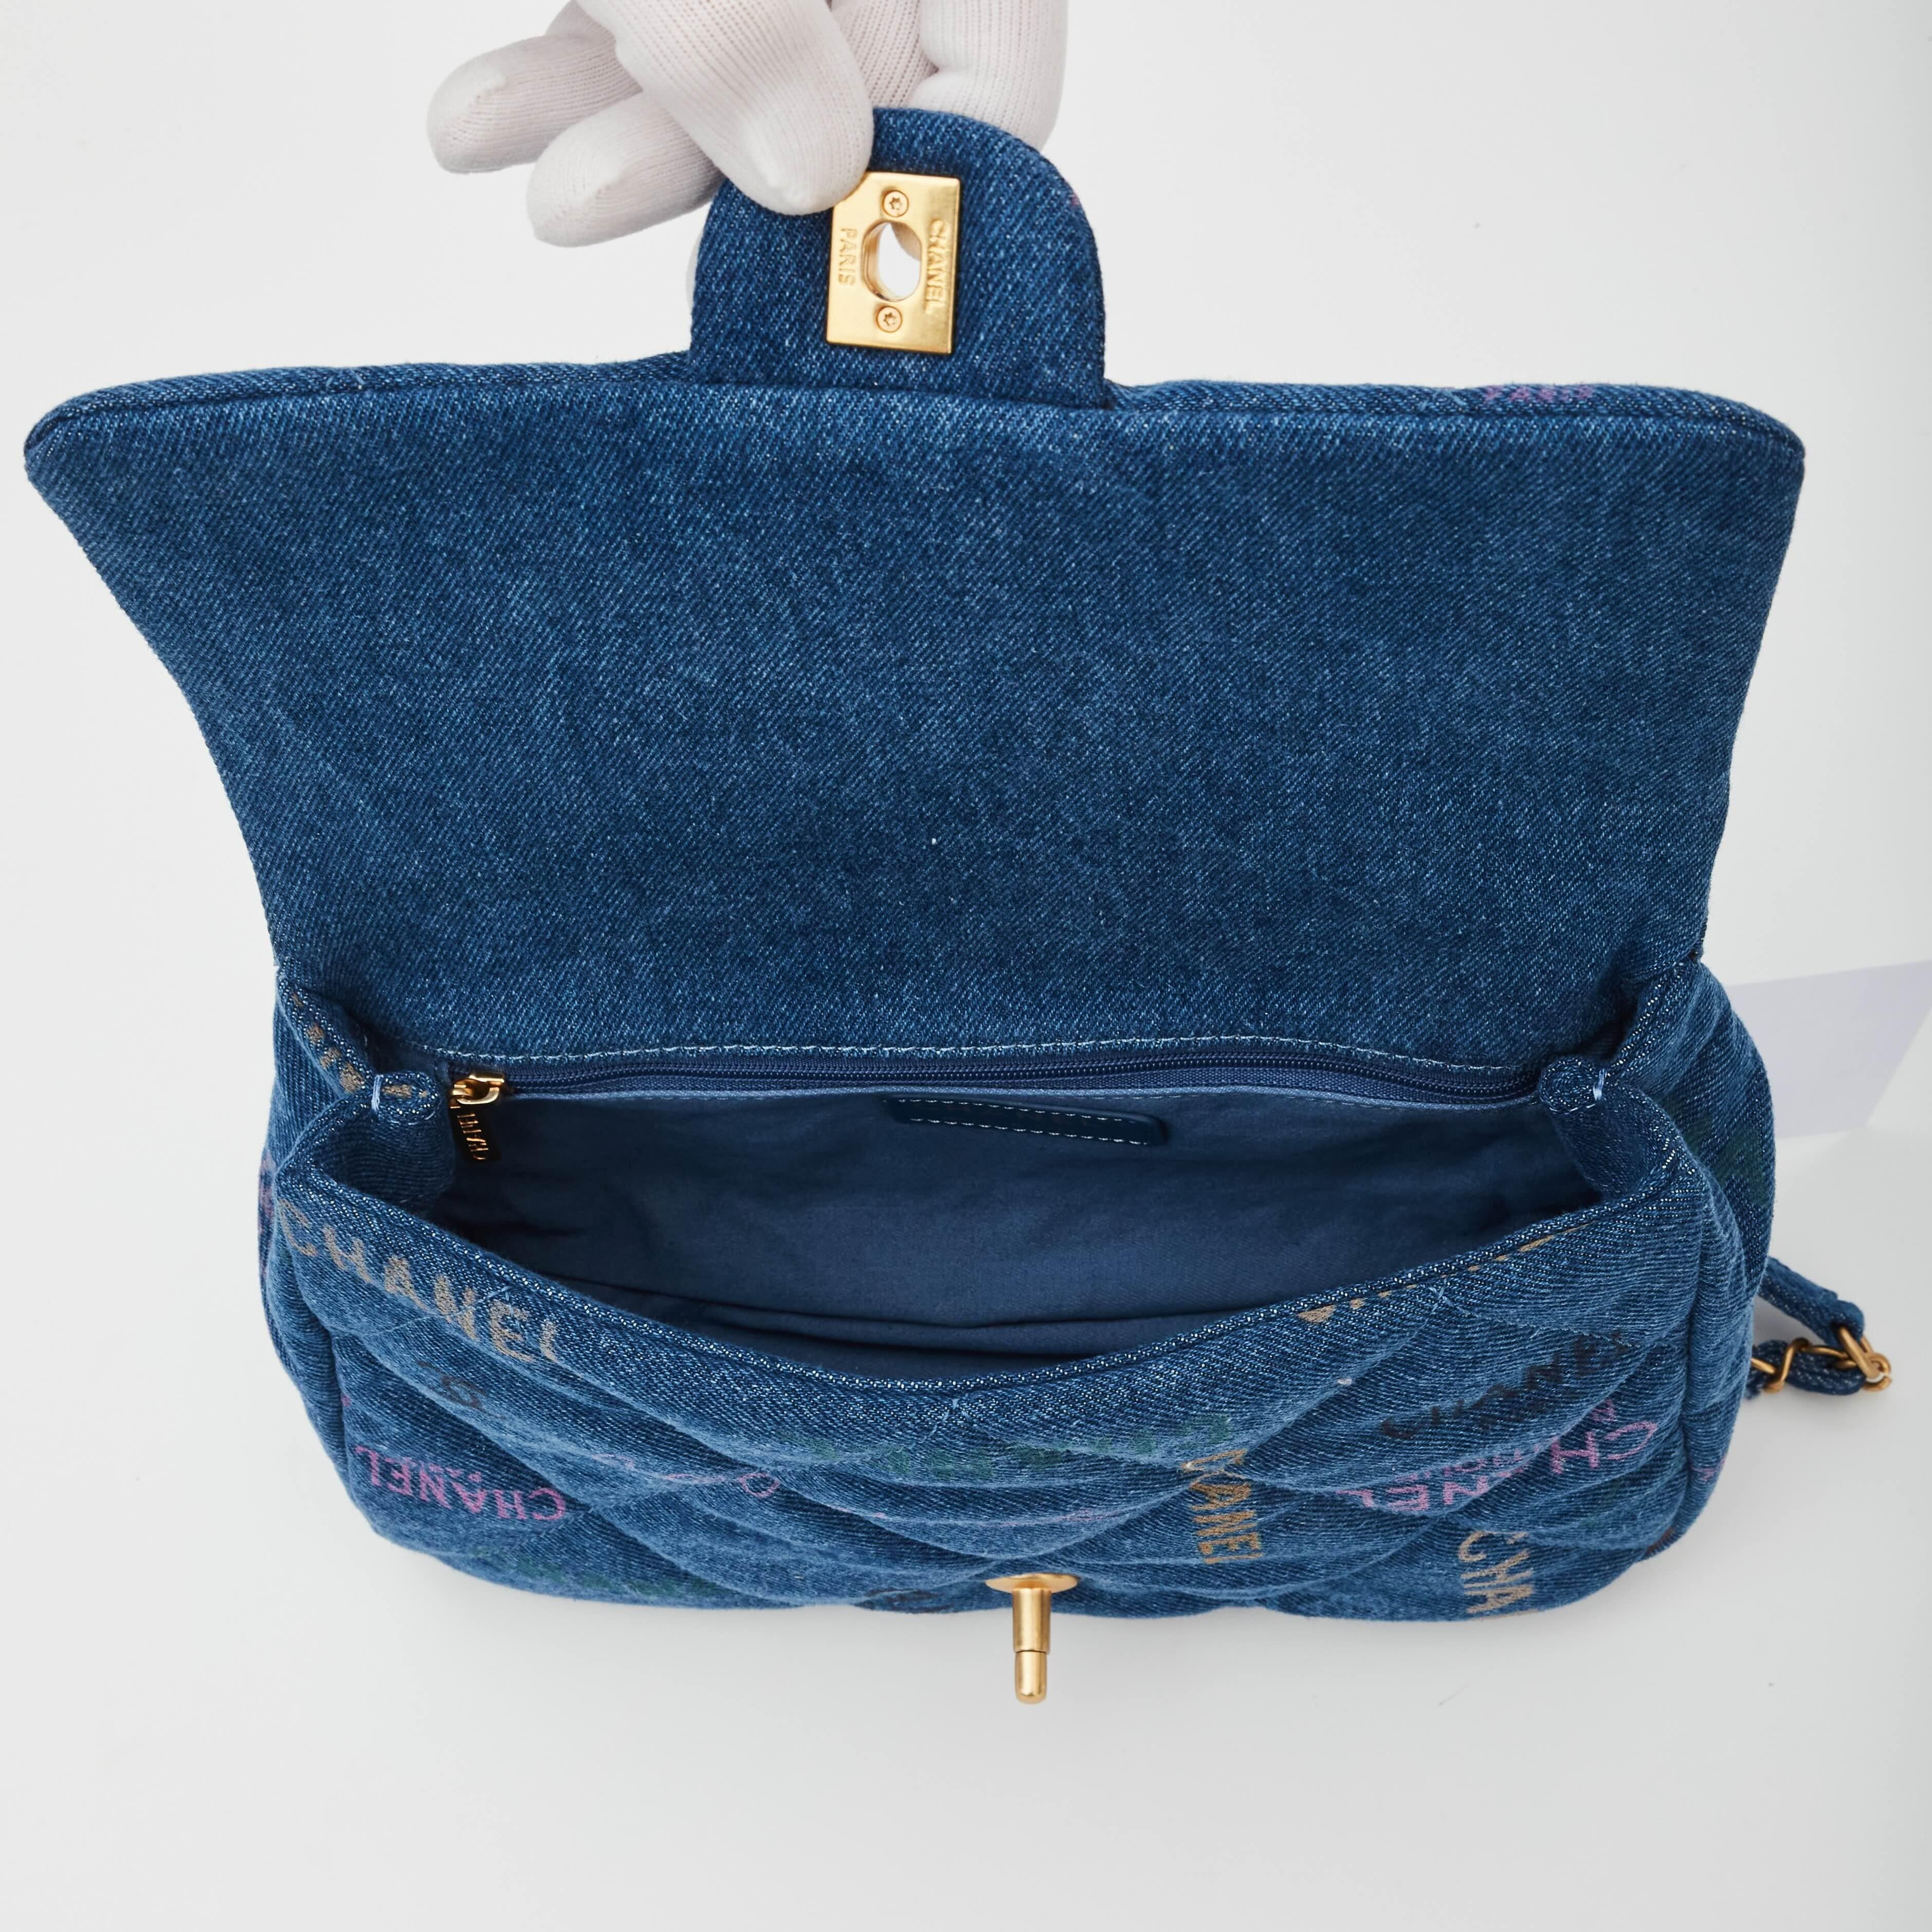 This flap bag is made from blue denim. The bag features a crossbody canvas threaded shiny gold chain shoulder strap. It also features a graffiti CC motif, and shiny gold Chanel CC turn lock that opens the flap to a matching fabric interior with a